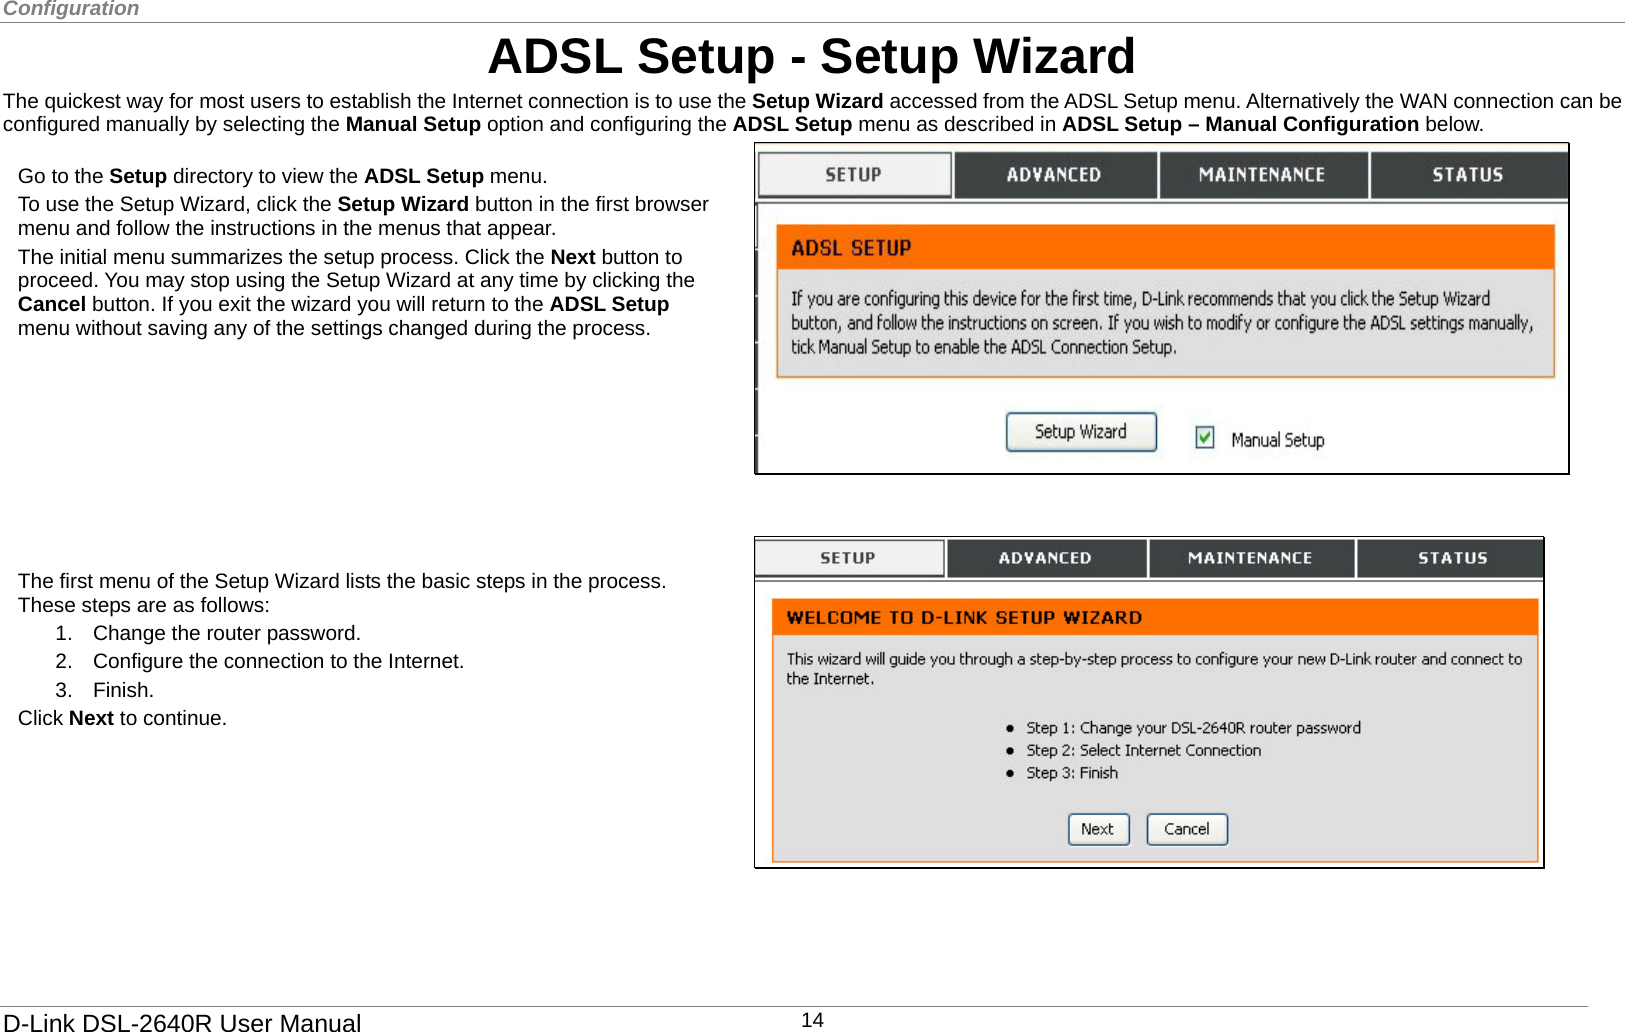 Configuration  ADSL Setup - Setup Wizard The quickest way for most users to establish the Internet connection is to use the Setup Wizard accessed from the ADSL Setup menu. Alternatively the WAN connection can be configured manually by selecting the Manual Setup option and configuring the ADSL Setup menu as described in ADSL Setup – Manual Configuration below.   The first menu of the Setup Wizard lists the basic steps in the process. These steps are as follows:   1.  Change the router password. 2.  Configure the connection to the Internet.   3. Finish. Click Next to continue.        Go to the Setup directory to view the ADSL Setup menu. To use the Setup Wizard, click the Setup Wizard button in the first browser menu and follow the instructions in the menus that appear. The initial menu summarizes the setup process. Click the Next button to proceed. You may stop using the Setup Wizard at any time by clicking the Cancel button. If you exit the wizard you will return to the ADSL Setup menu without saving any of the settings changed during the process.        D-Link DSL-2640R User Manual 14